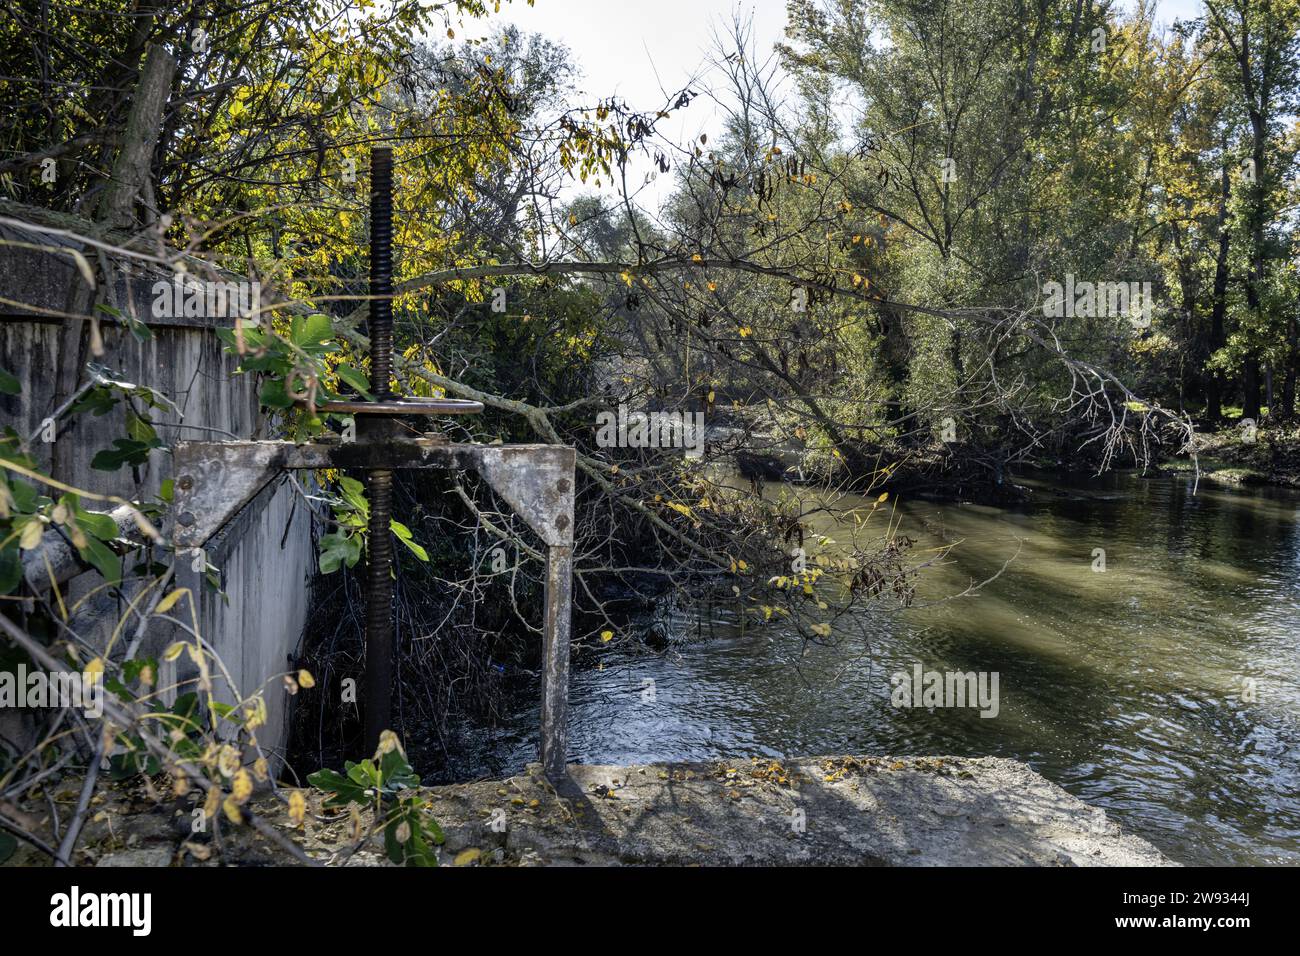 A metal flywheel wrench in a ditch to collect water from a river with many trees and weeds Stock Photo